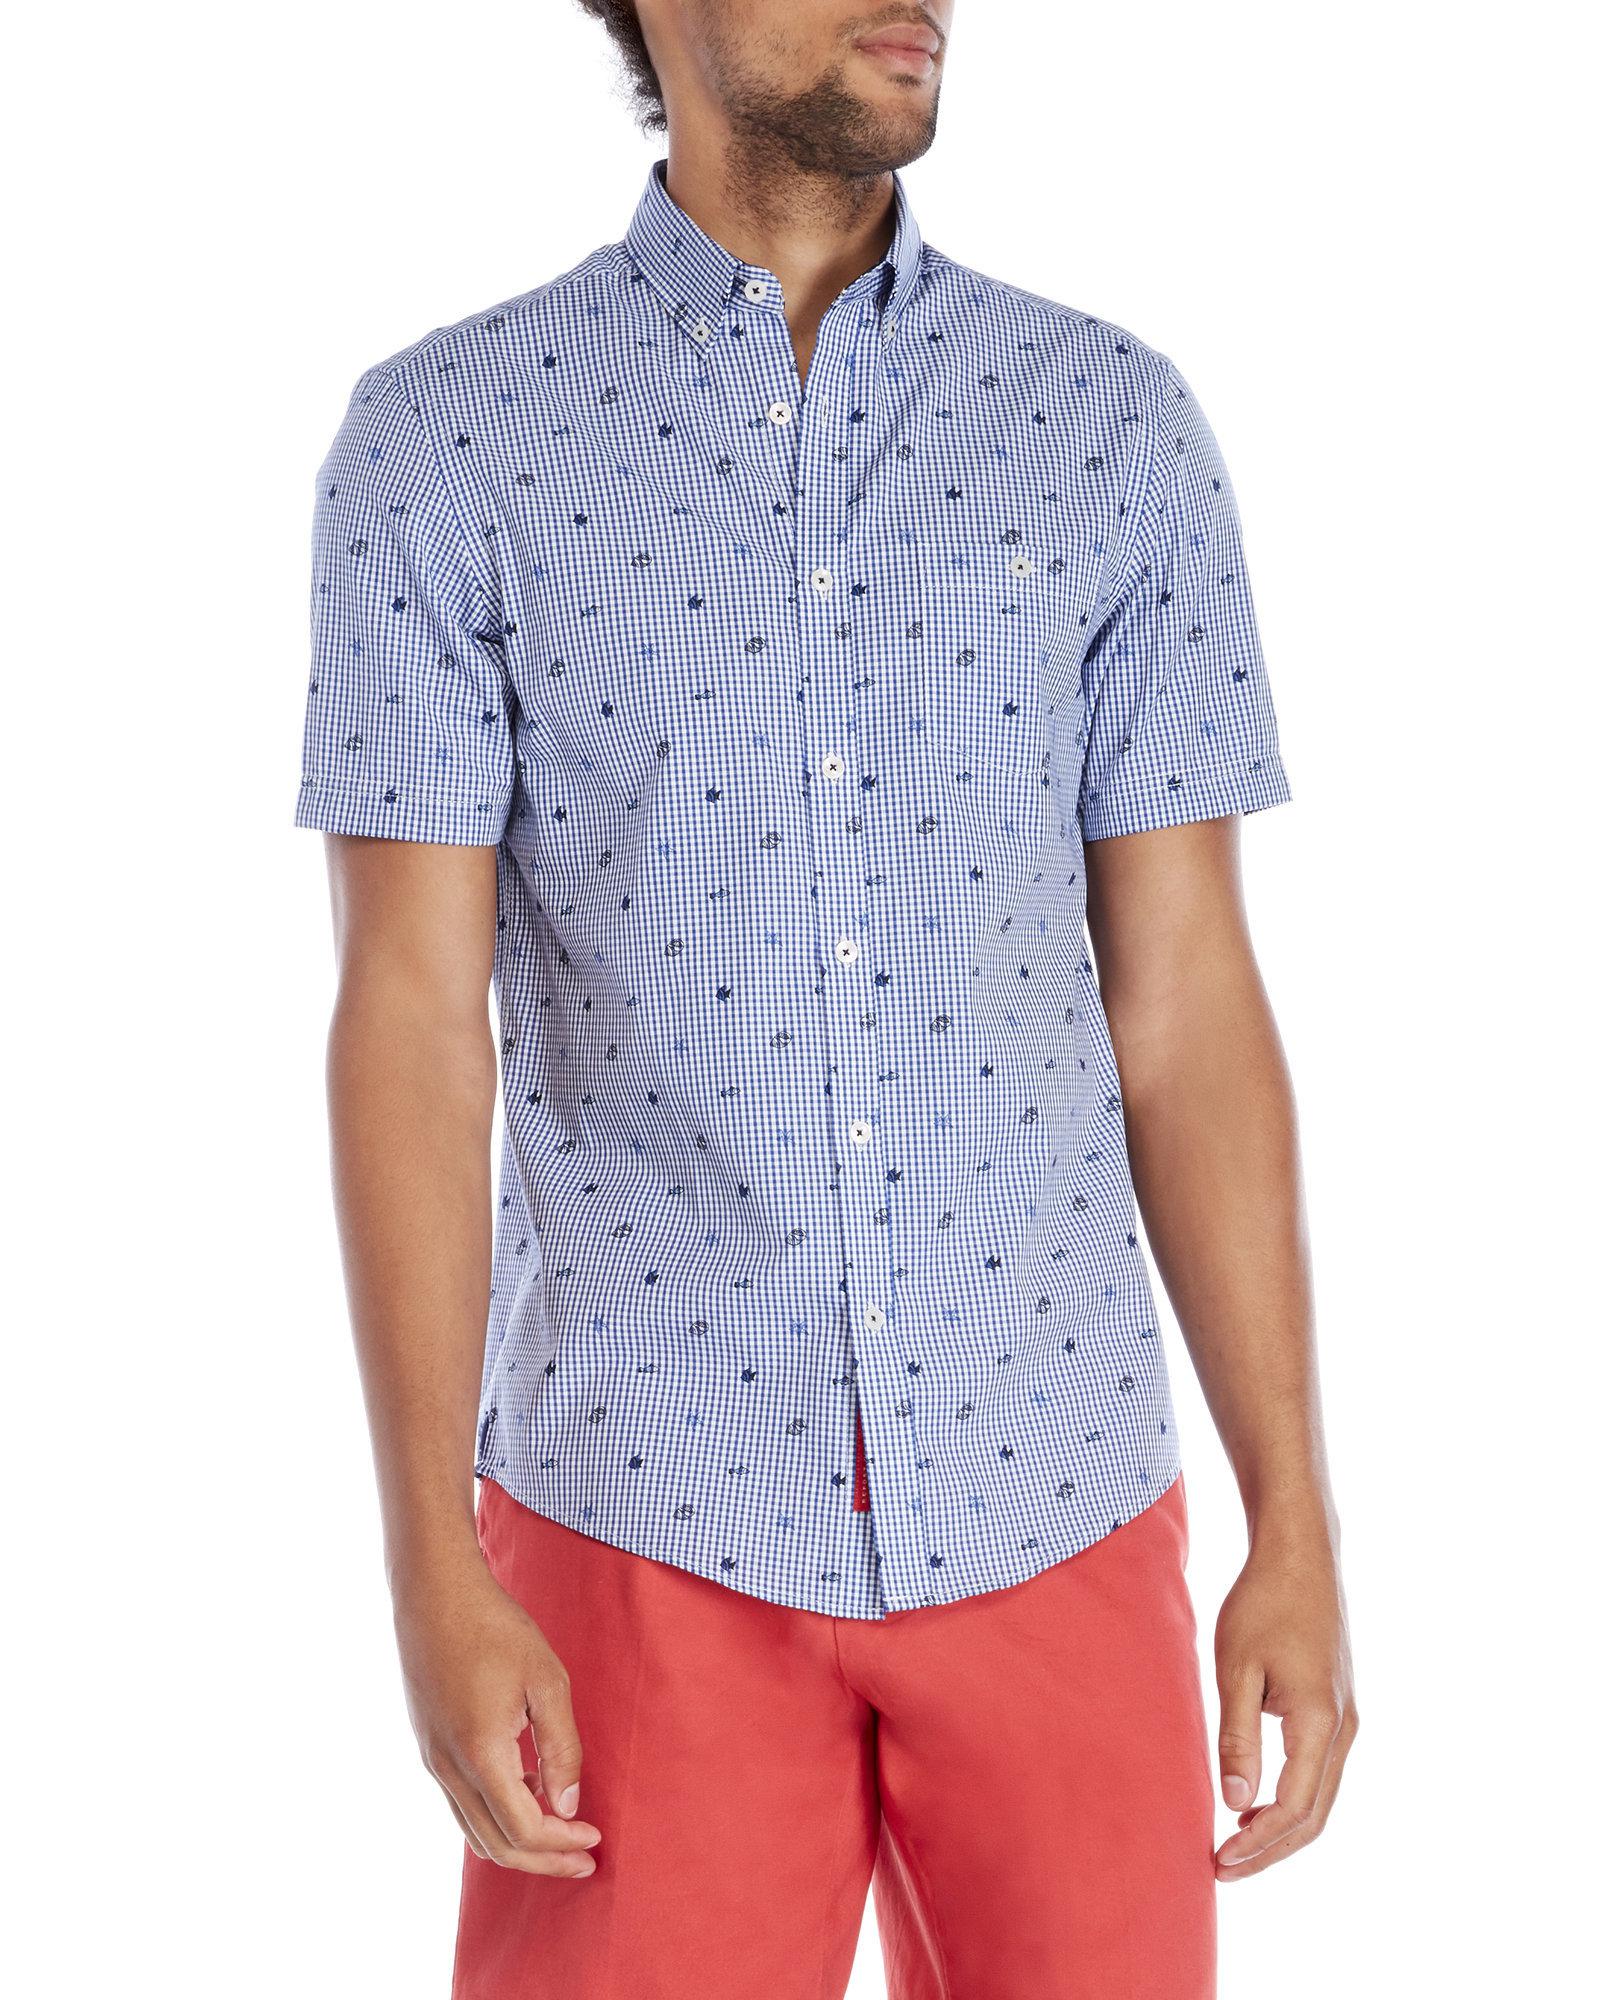 Lyst - Report Collection Gingham Fish Button-Down Shirt in Blue for Men